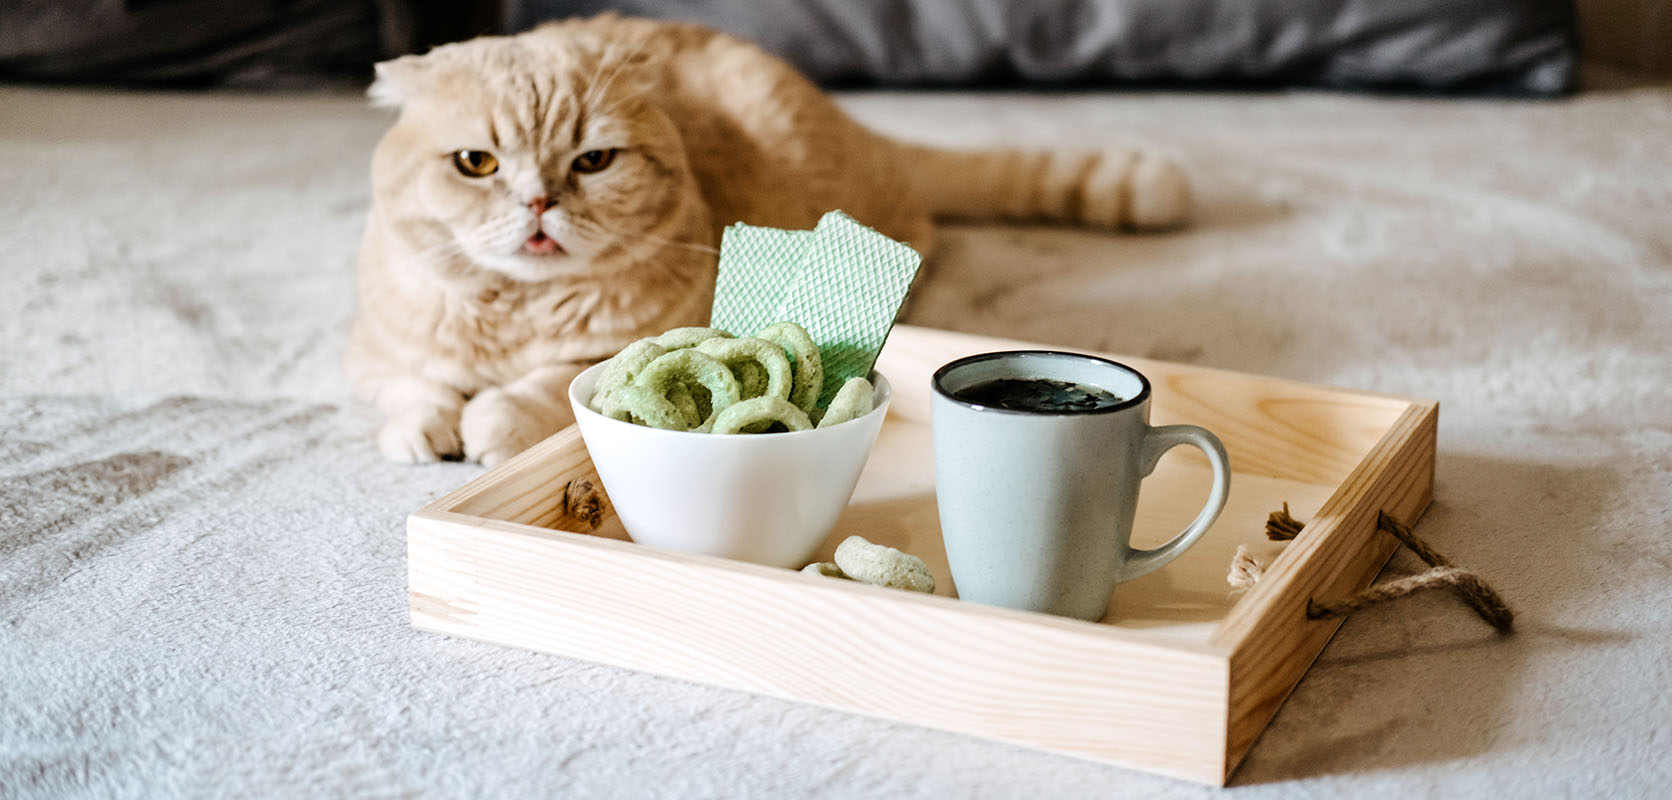 Image of tea serving and cat. buy weed online in canada from online dispensary low price bud.